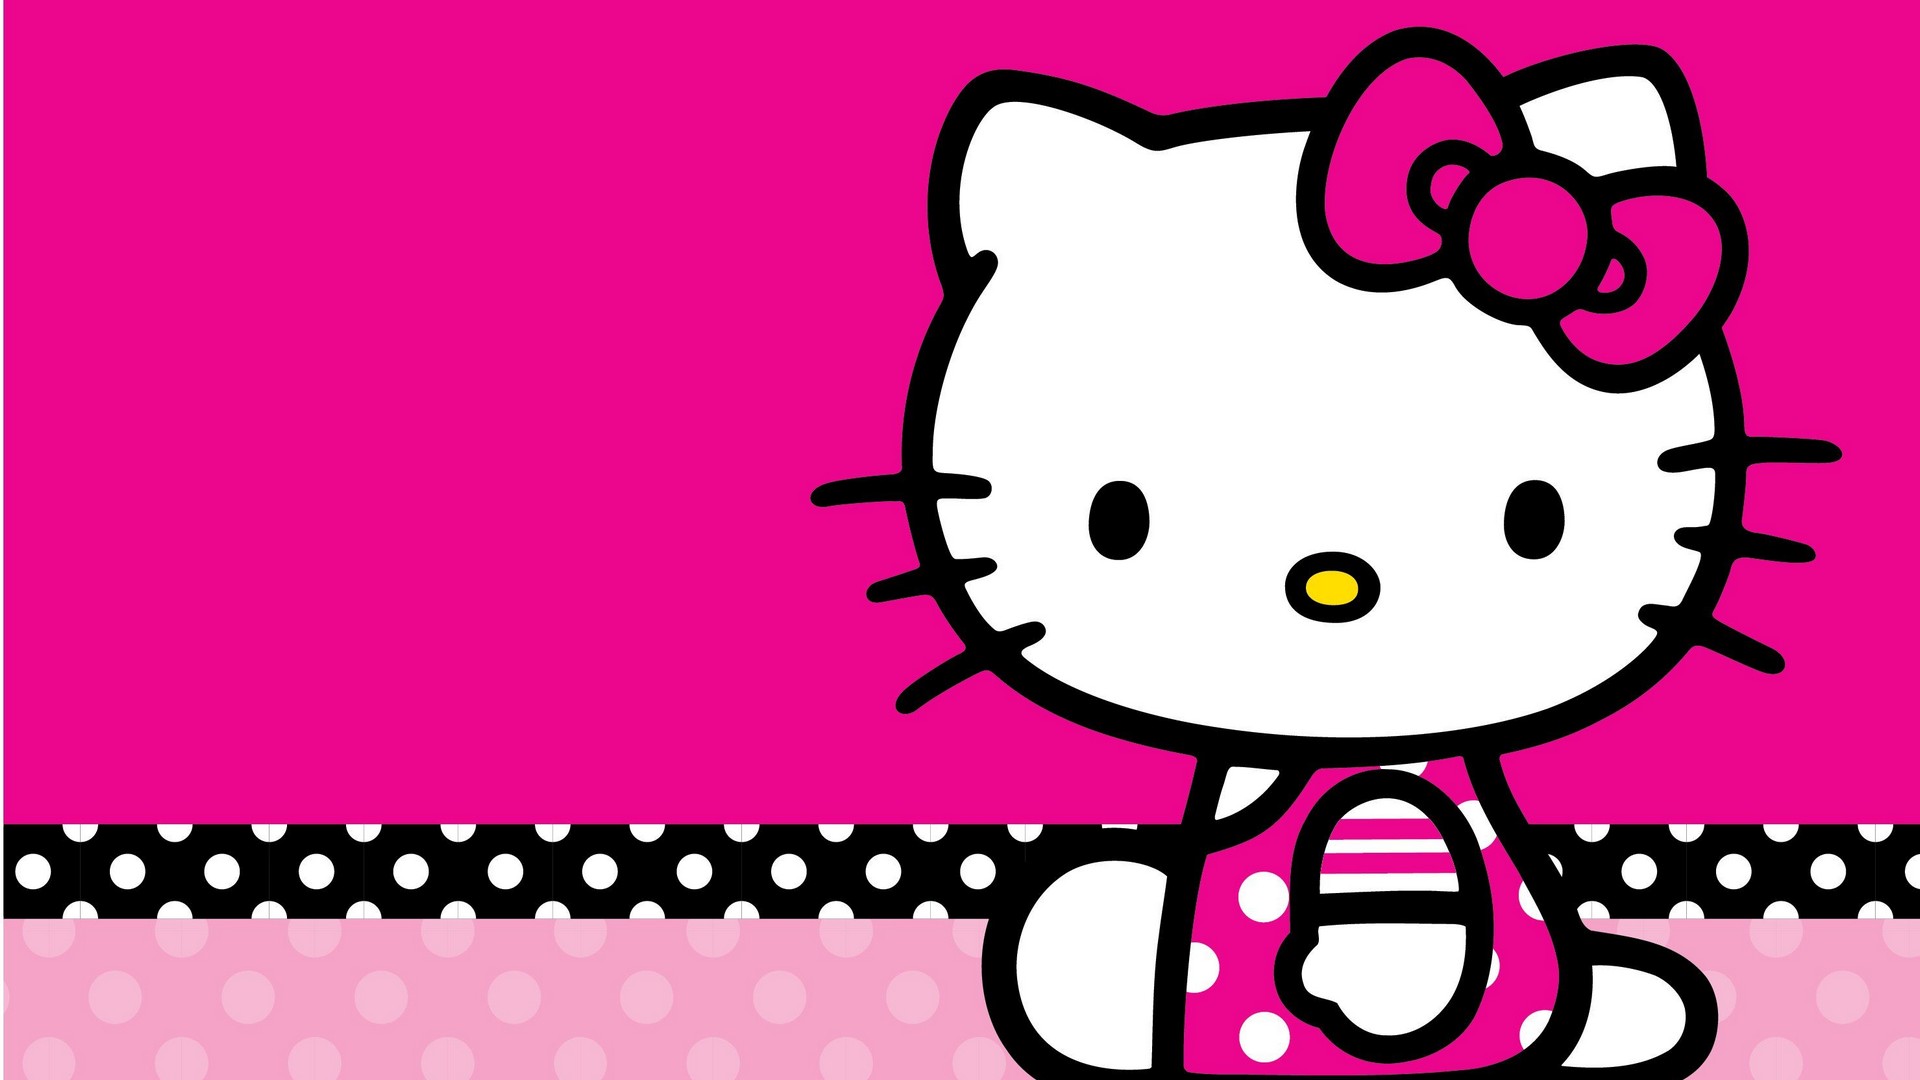 Best Hello Kitty Pictures Wallpaper with image resolution 1920x1080 pixel. You can use this wallpaper as background for your desktop Computer Screensavers, Android or iPhone smartphones